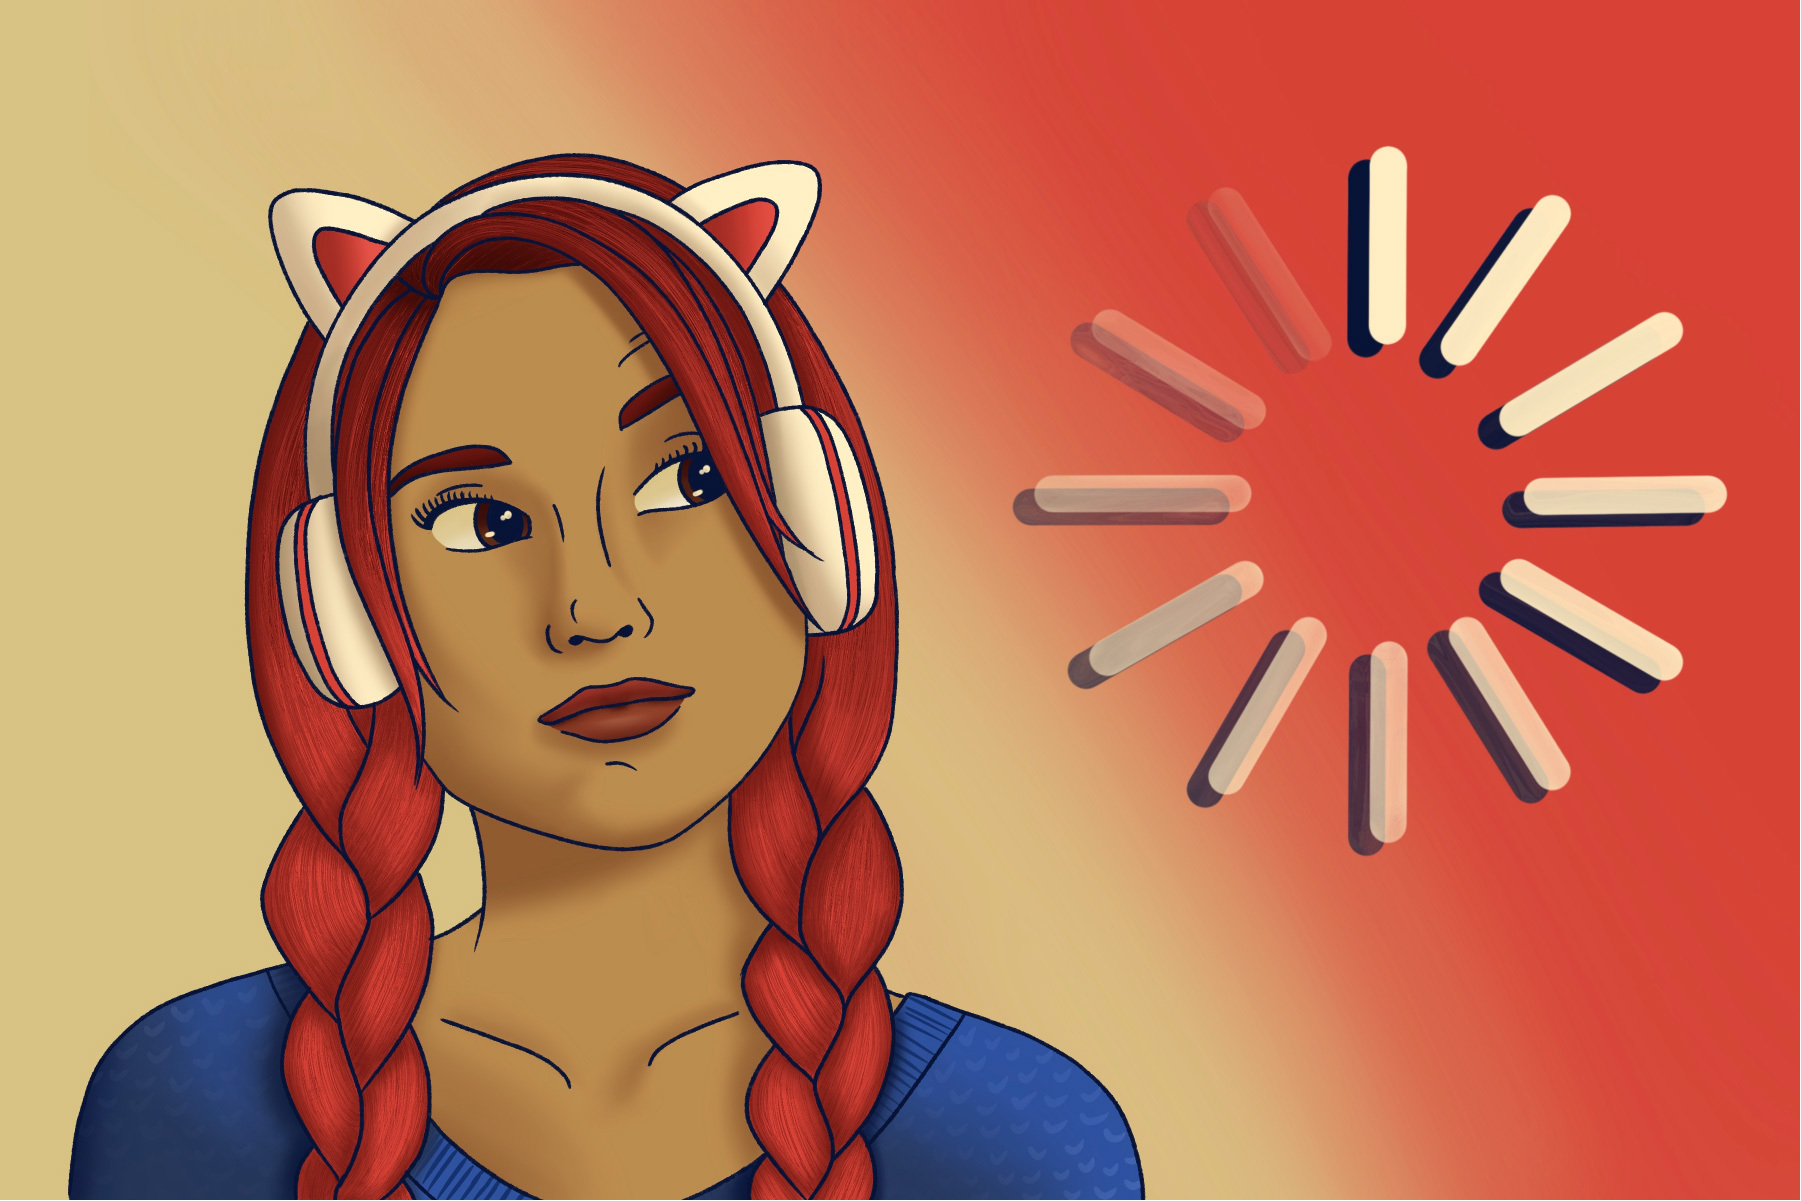 in an article about games similar to monster hunter rise, an illustration of a girl with headphones and cat ears looking at a loading symbol